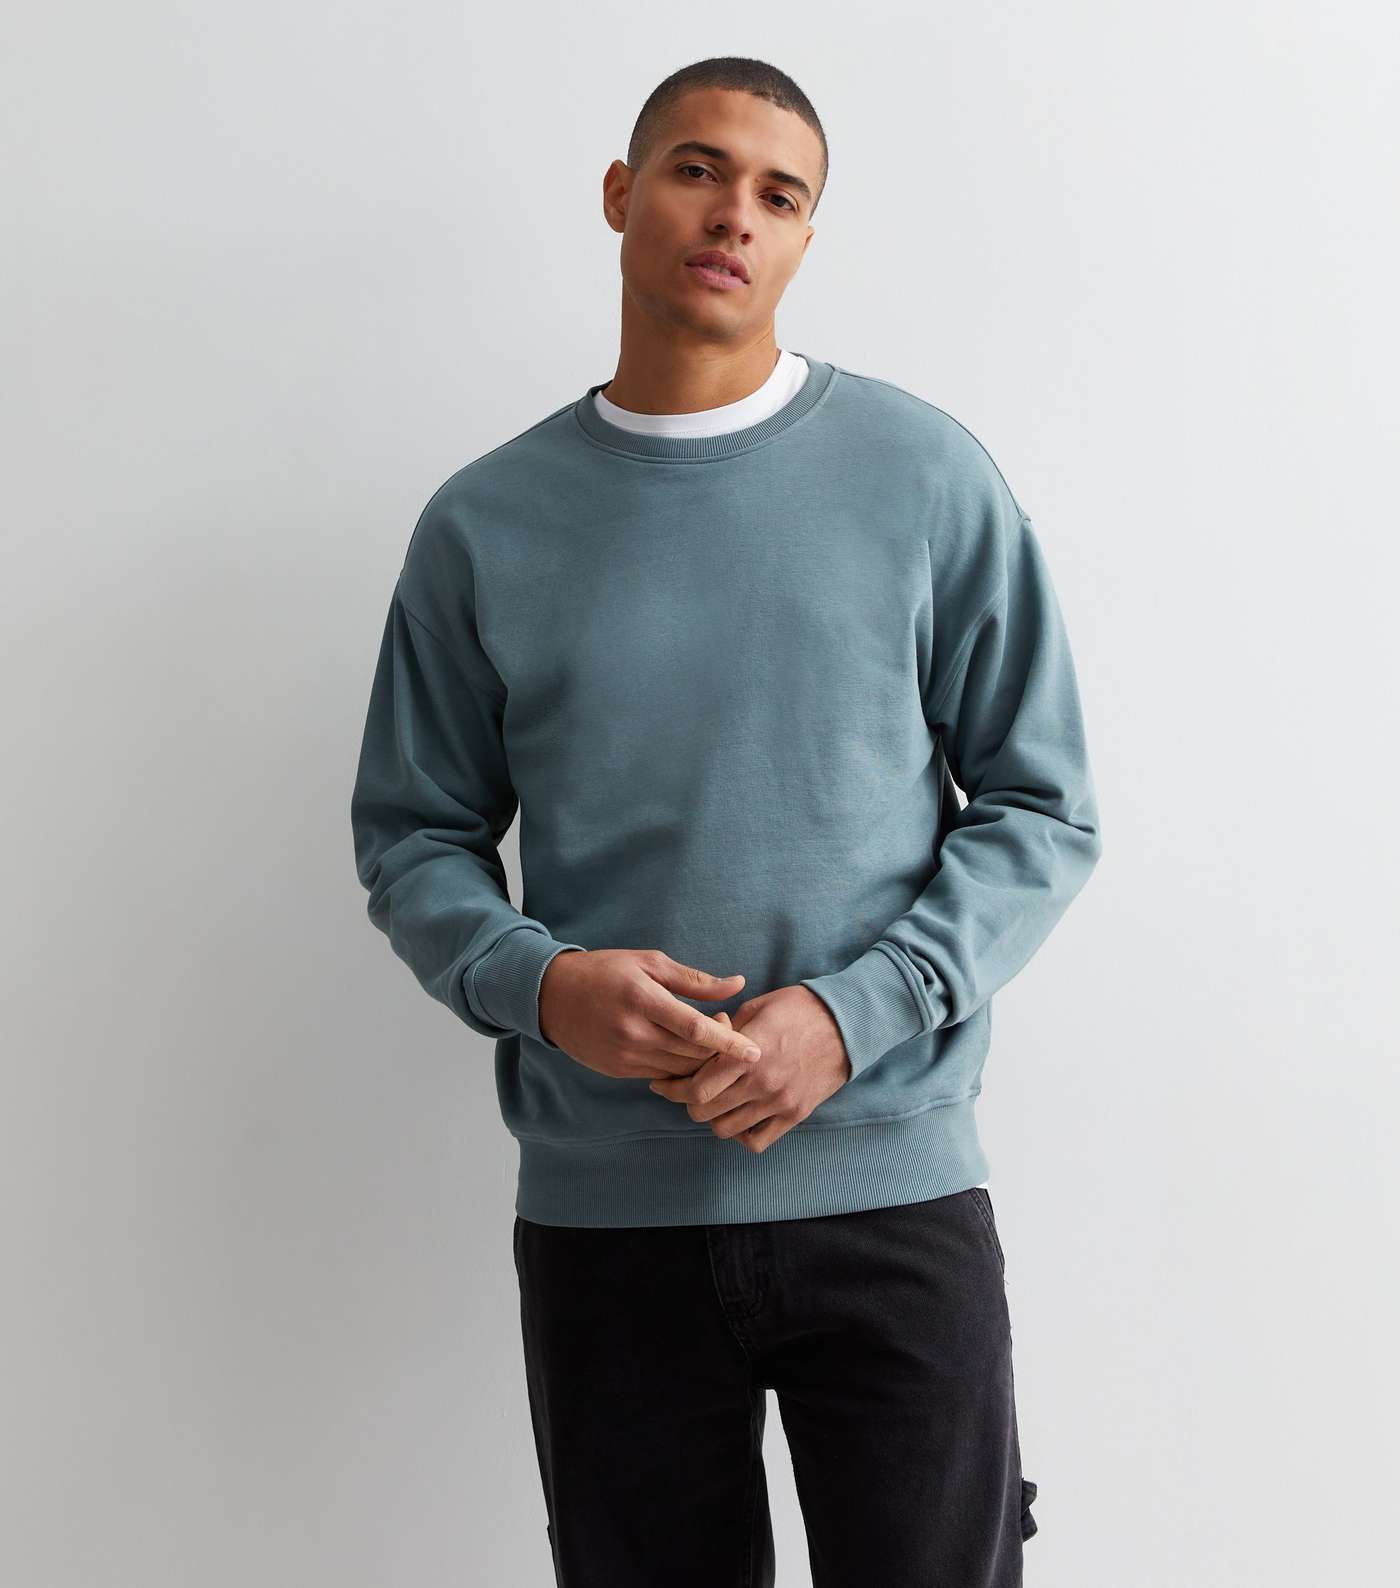 Teal Crew Neck Relaxed Fit Sweatshirt